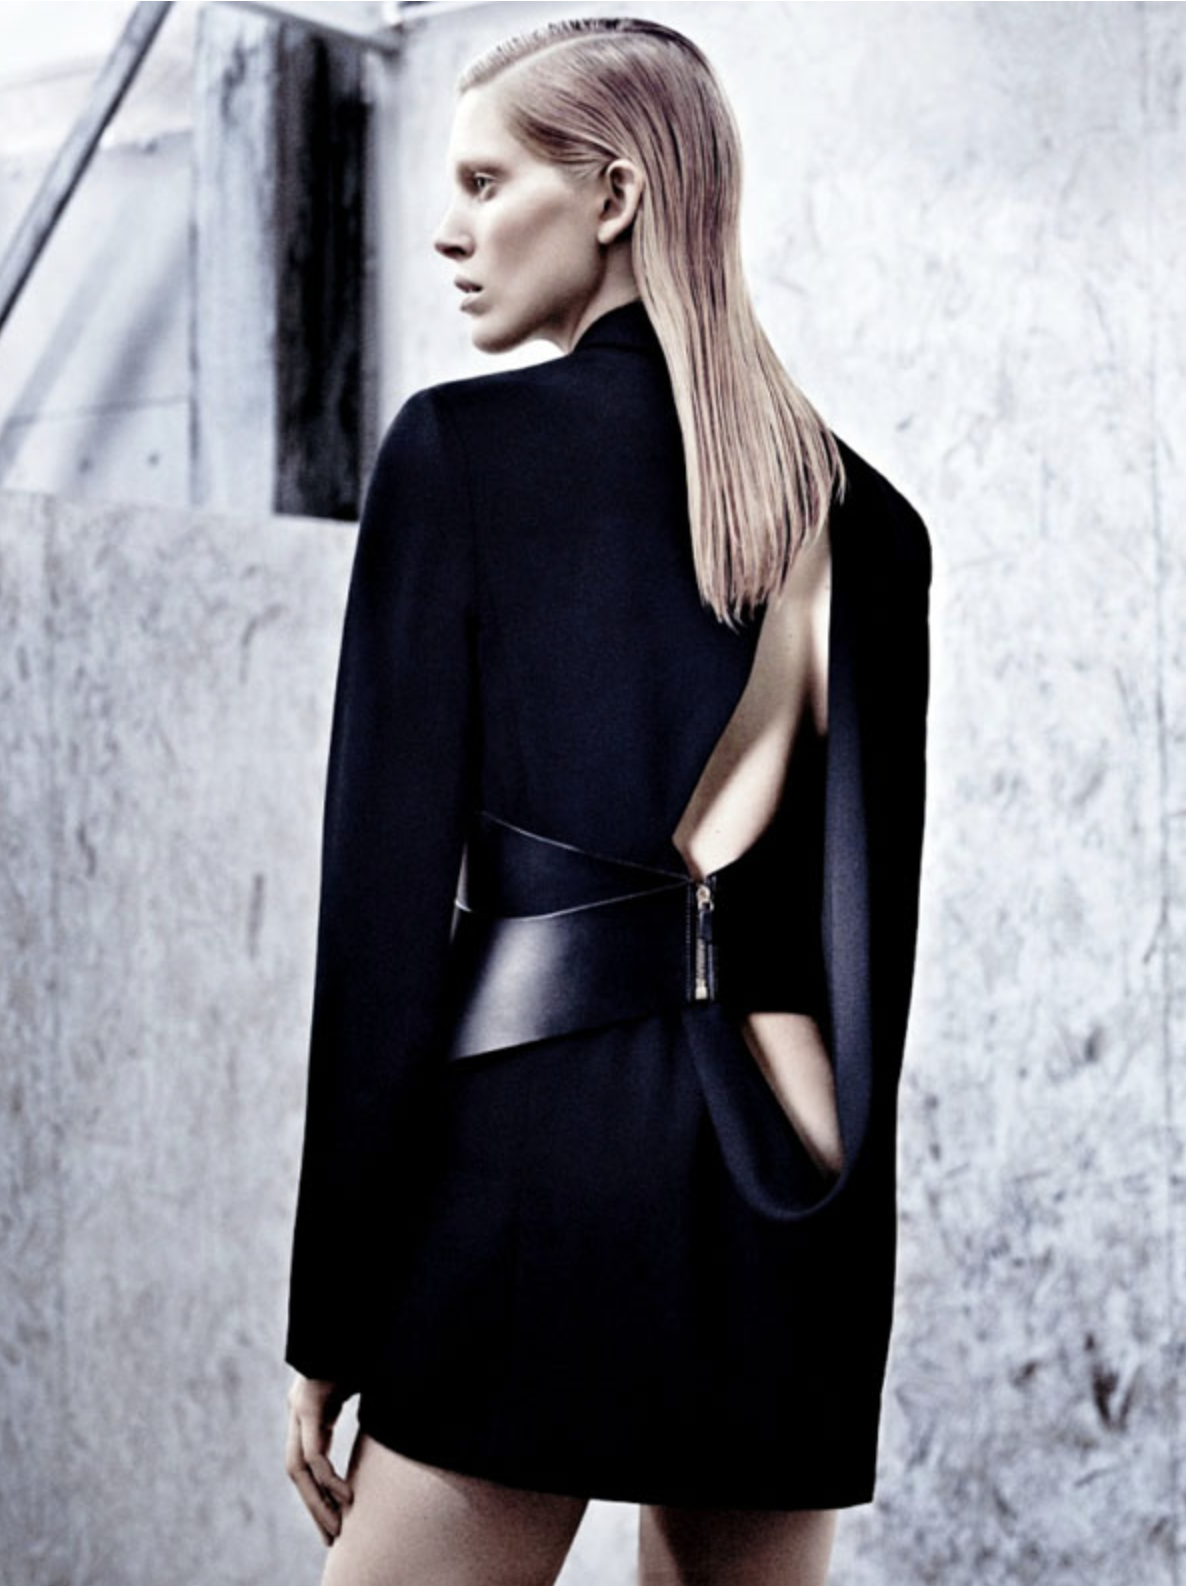 Iselin-Steiro-by-Craig-McDean-Vogue-UK-March-2013-1.png